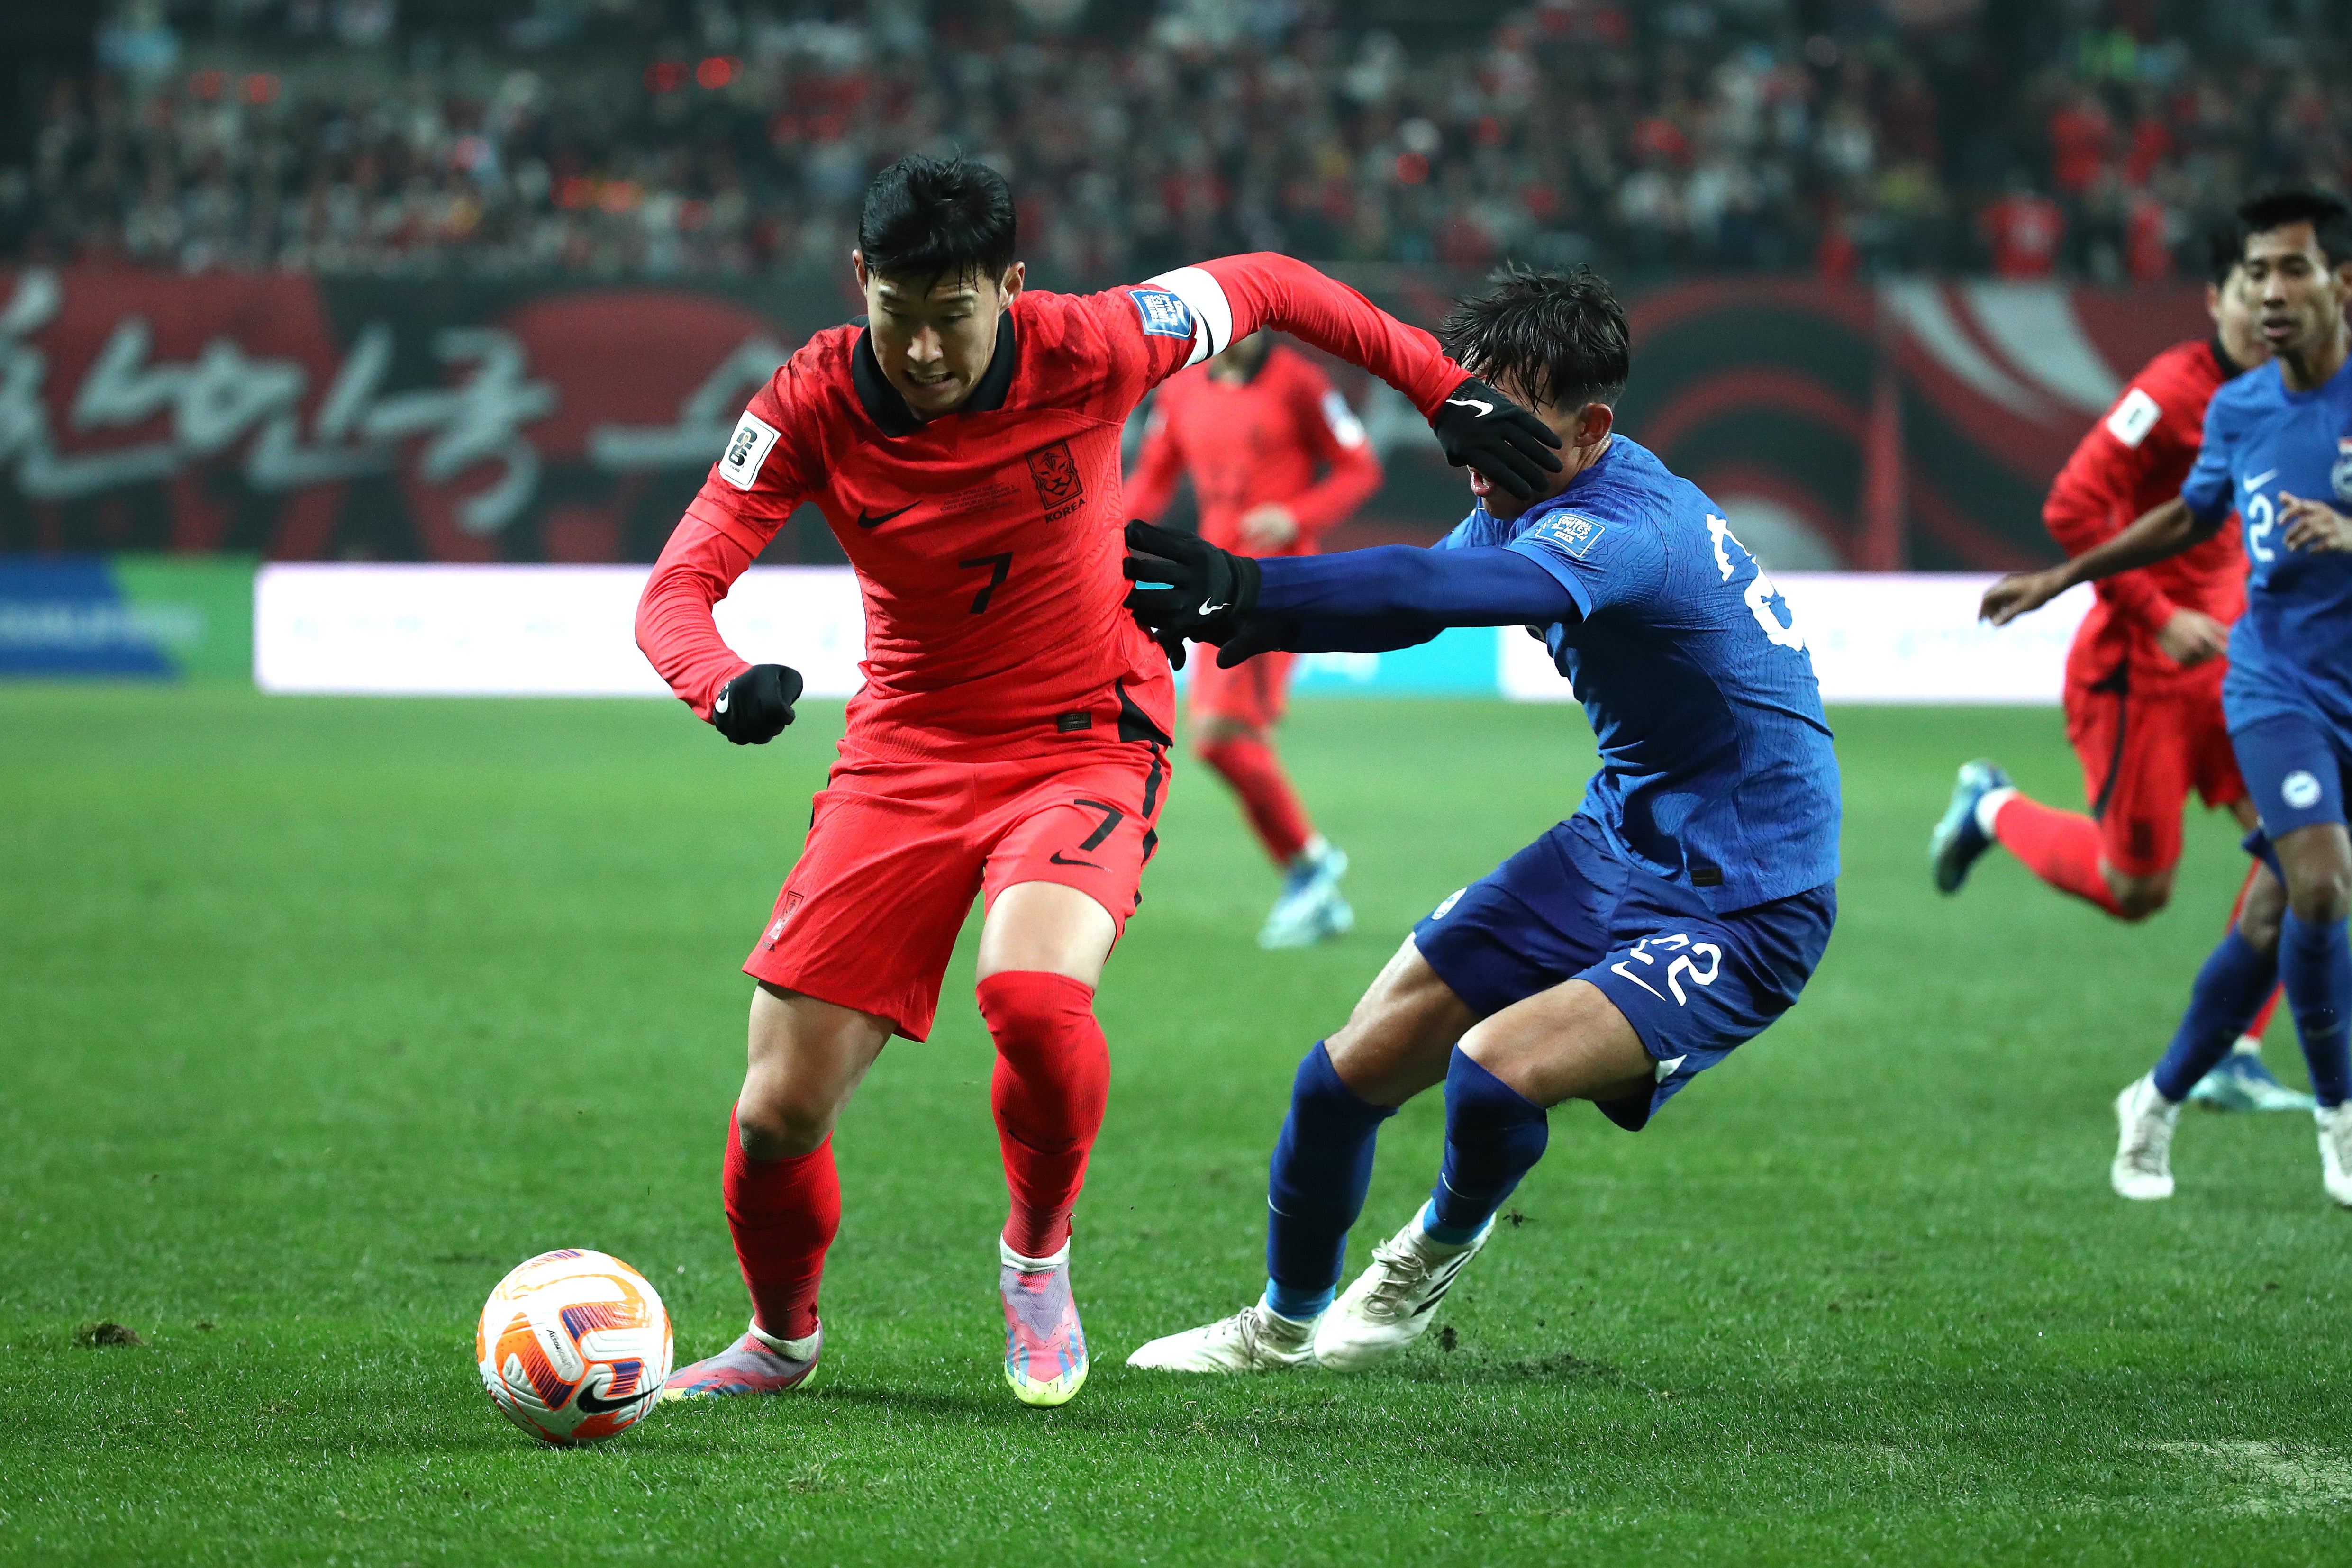 Son Heung-min will be one of the stars to watch in Qatar